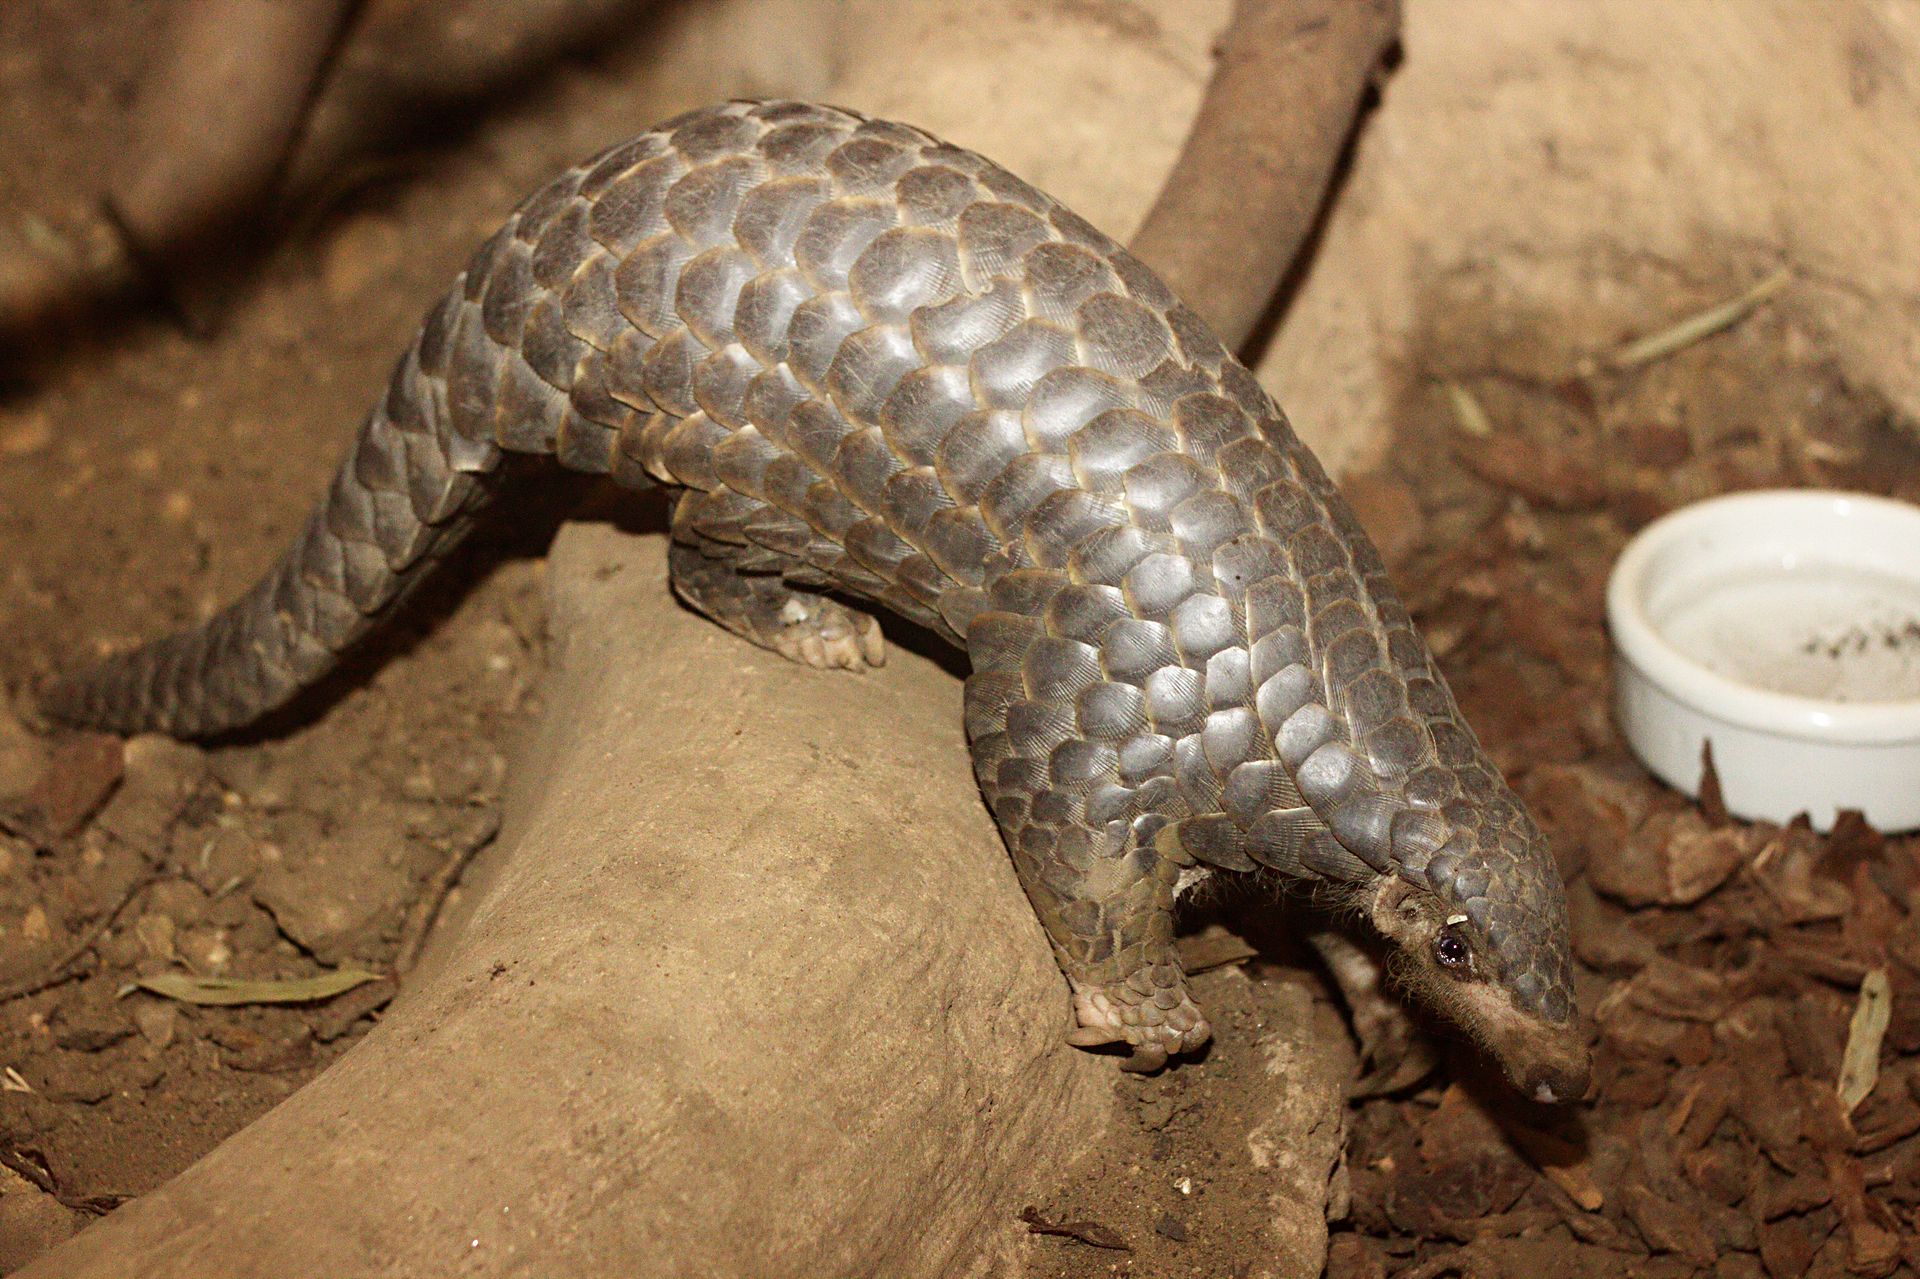 WTF is a pangolin? Fall in love with this sentient artichoke before it goes extinct